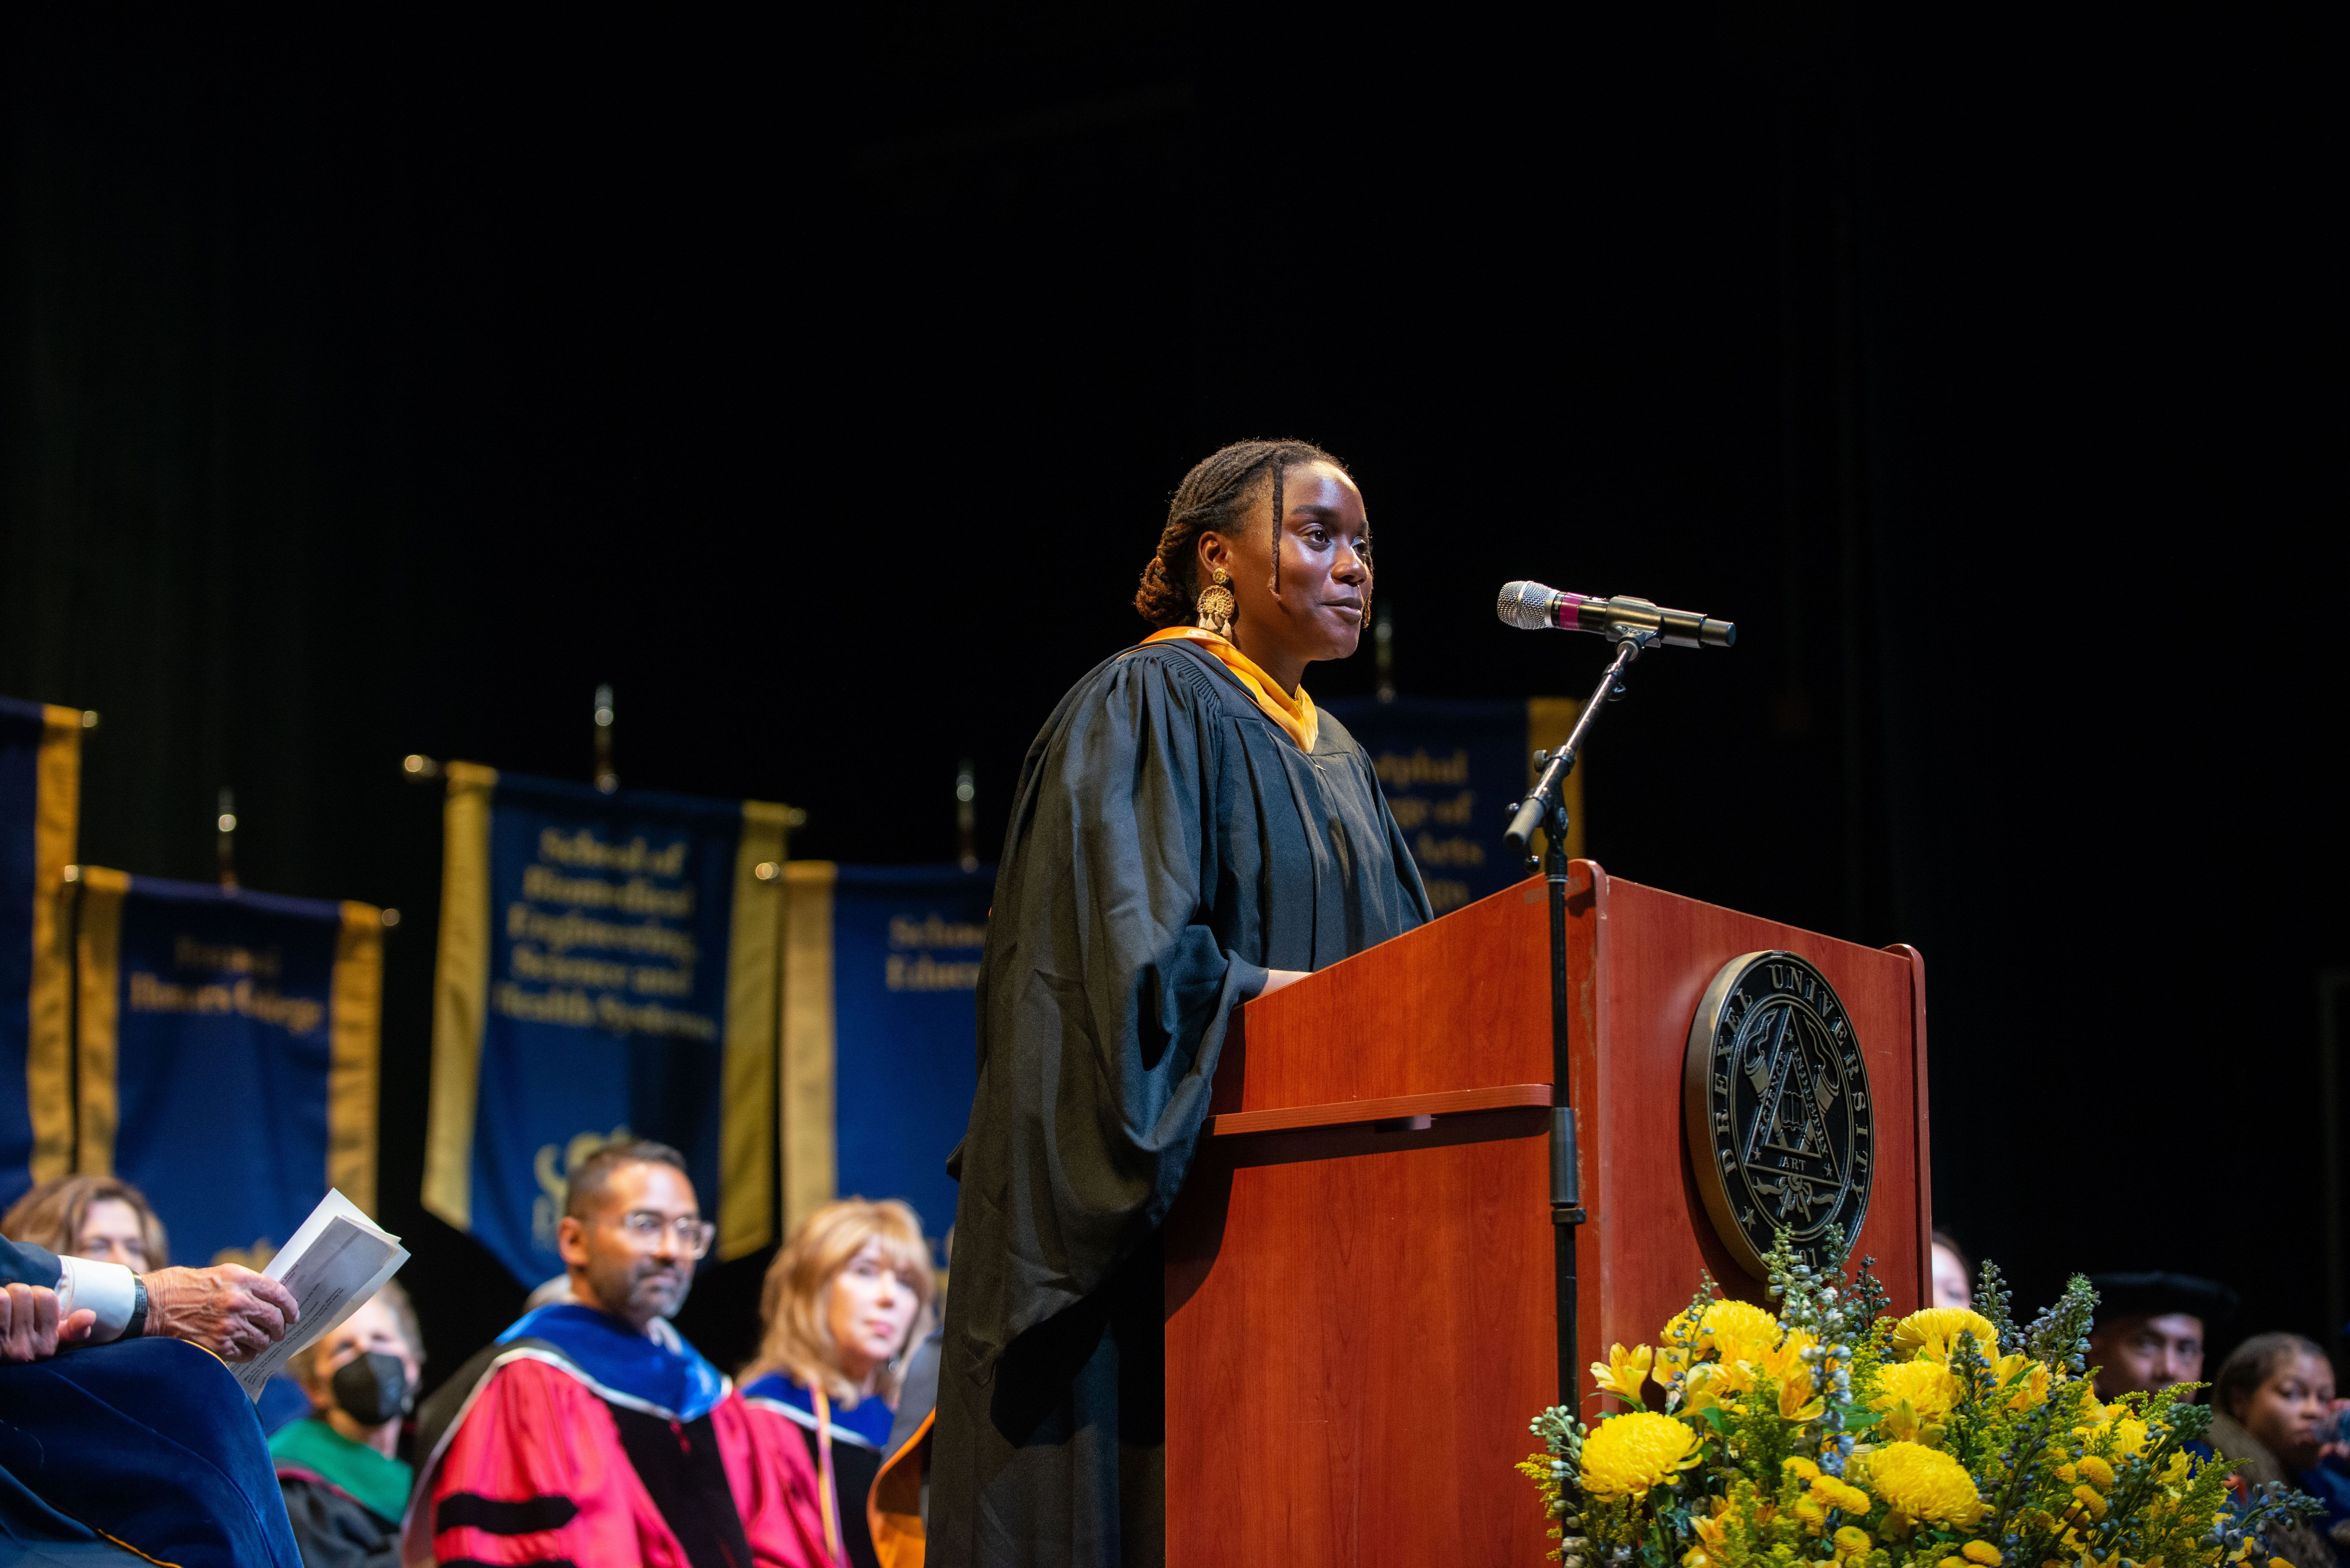 Alexis Wiley stands at the podium at Drexel's 2022 Convocation ceremony. Photo credit: Shira Yudkoff Photography.